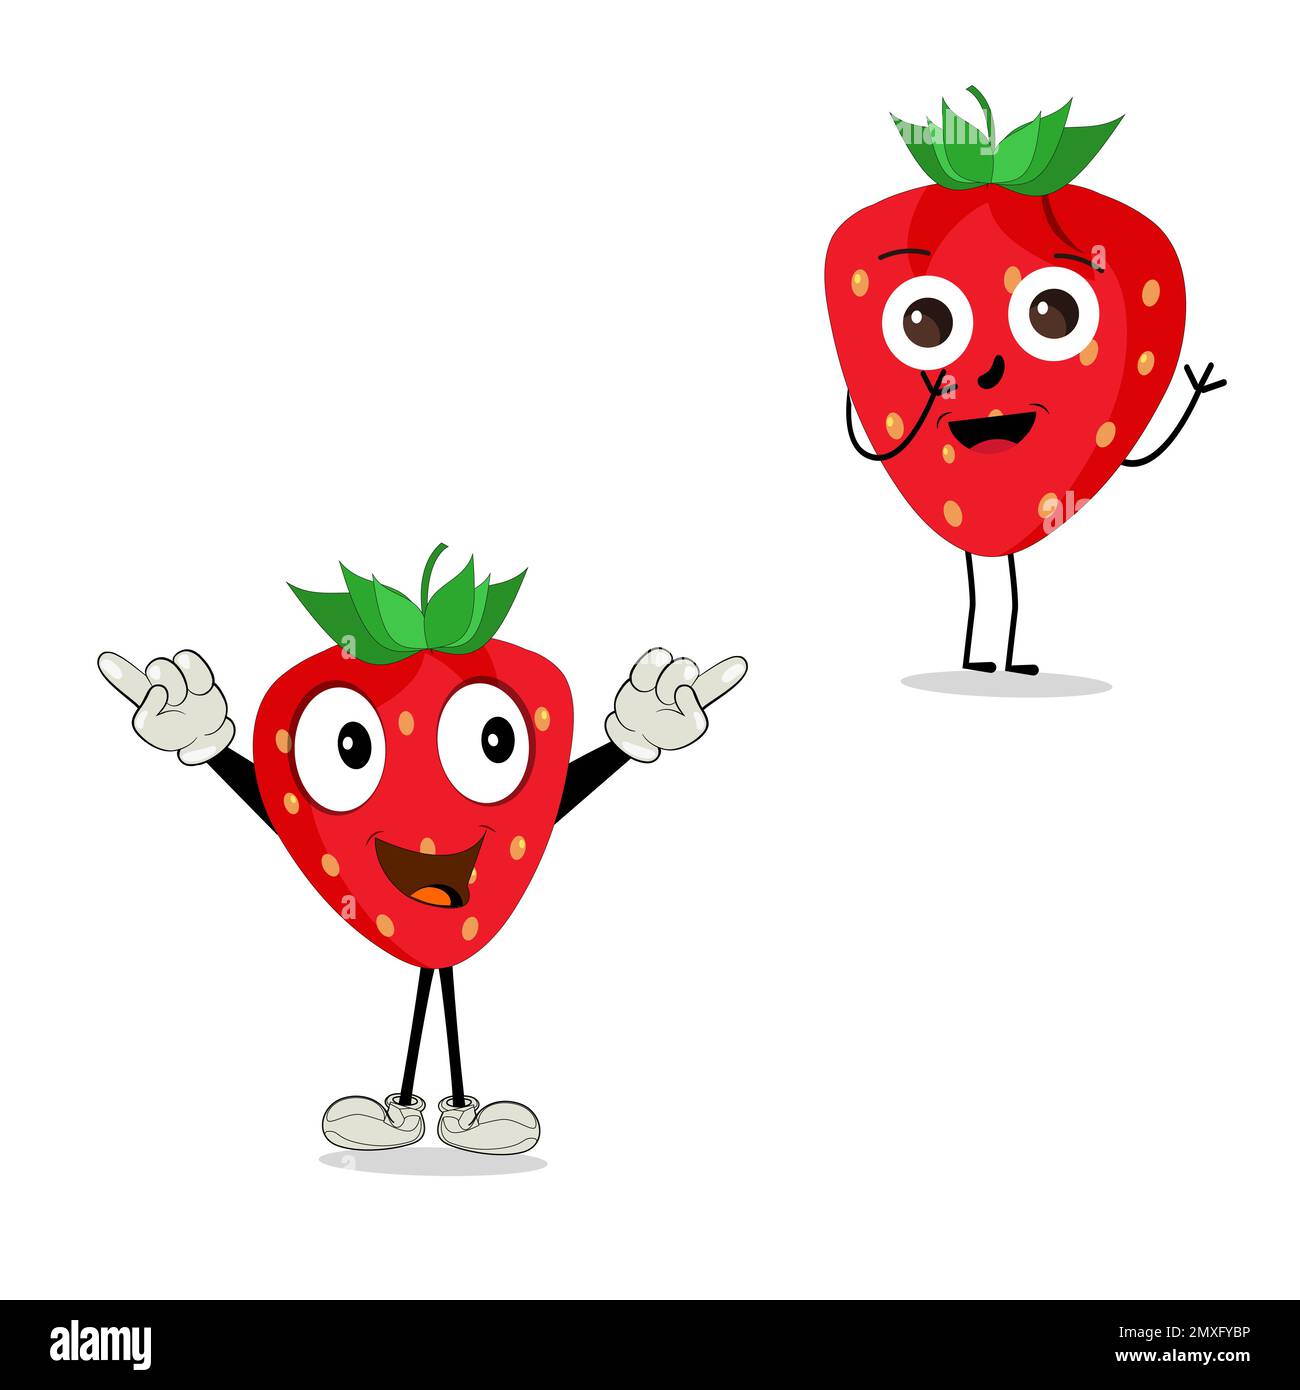 Strawberry Fruit Cartoon Mascot Character. Strawberry icon. Cute fruit vector character set isolated on white backround. Stock Vector